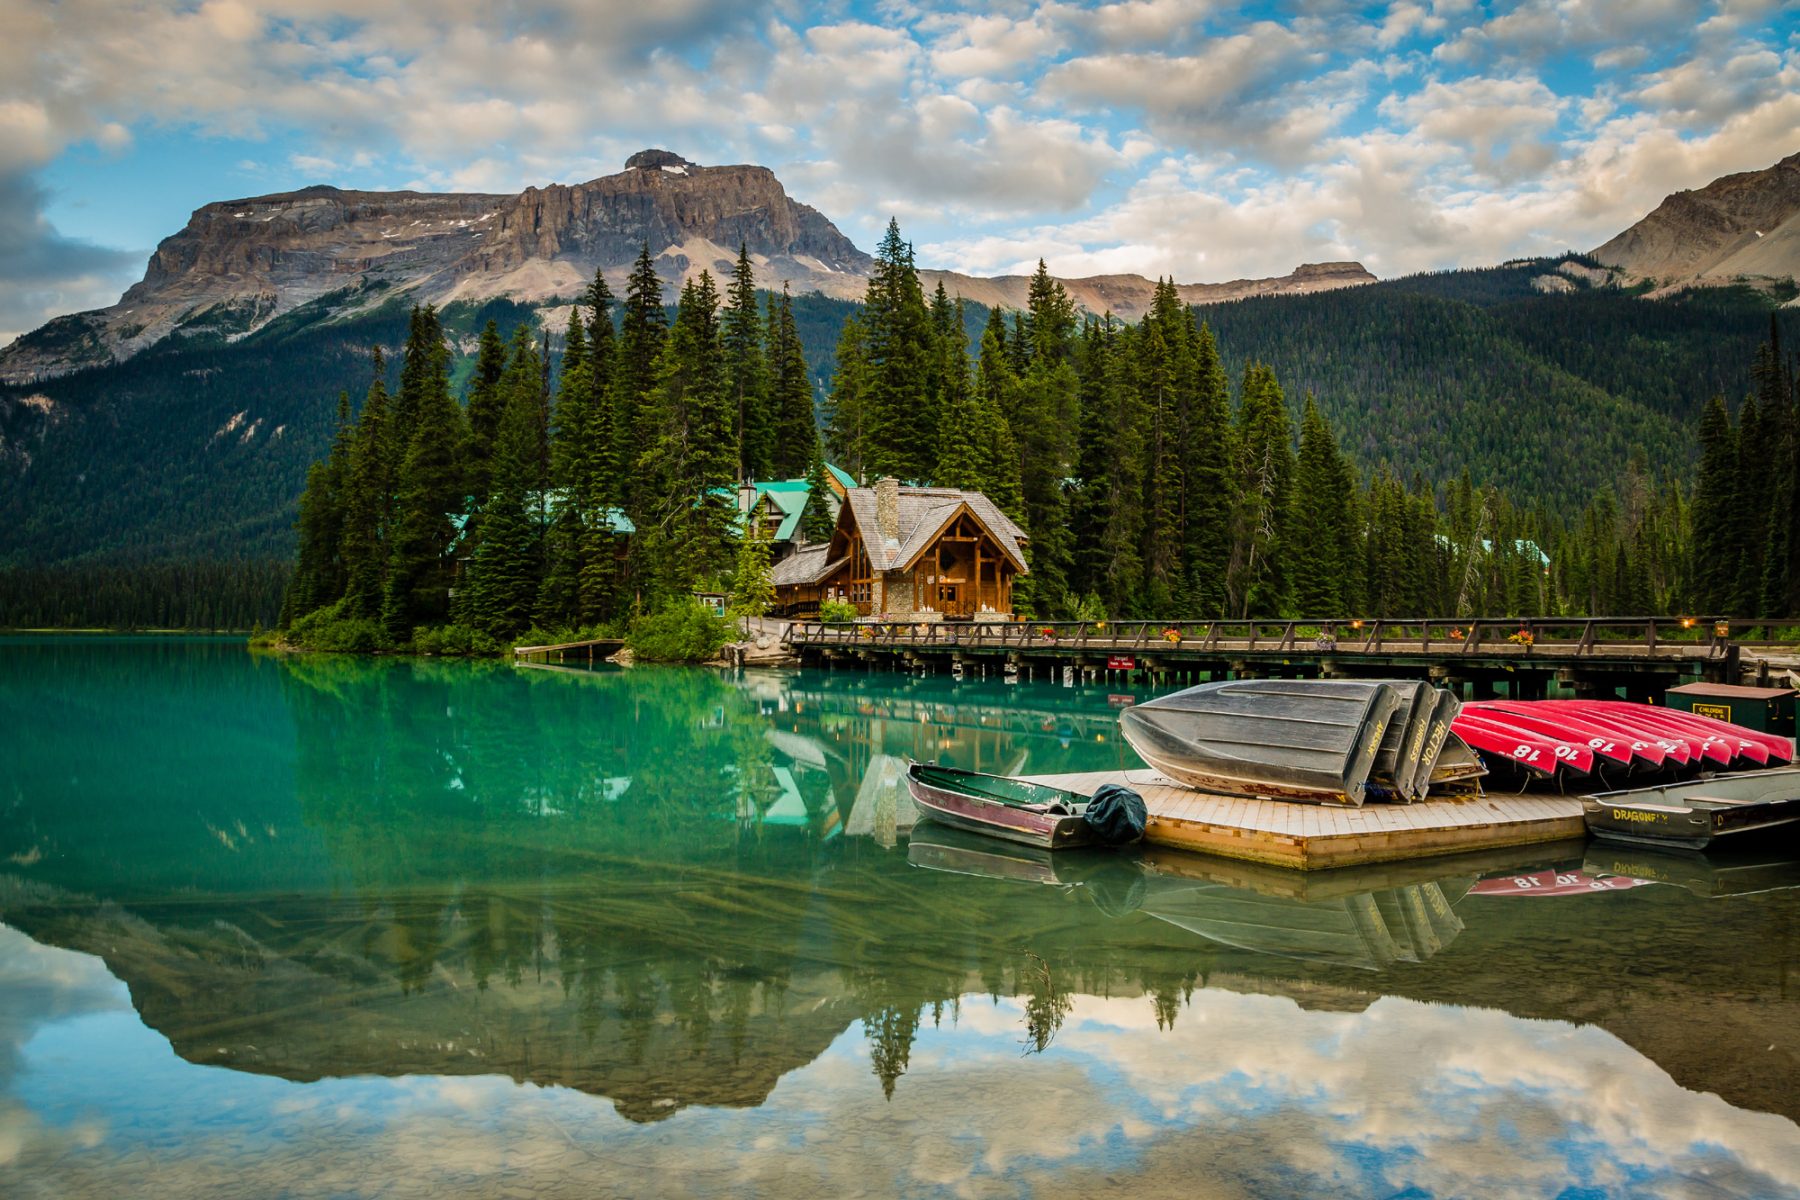 Experience a fishing lodge located in Northern Alberta surrounded by the  Borreal forrest, Canada